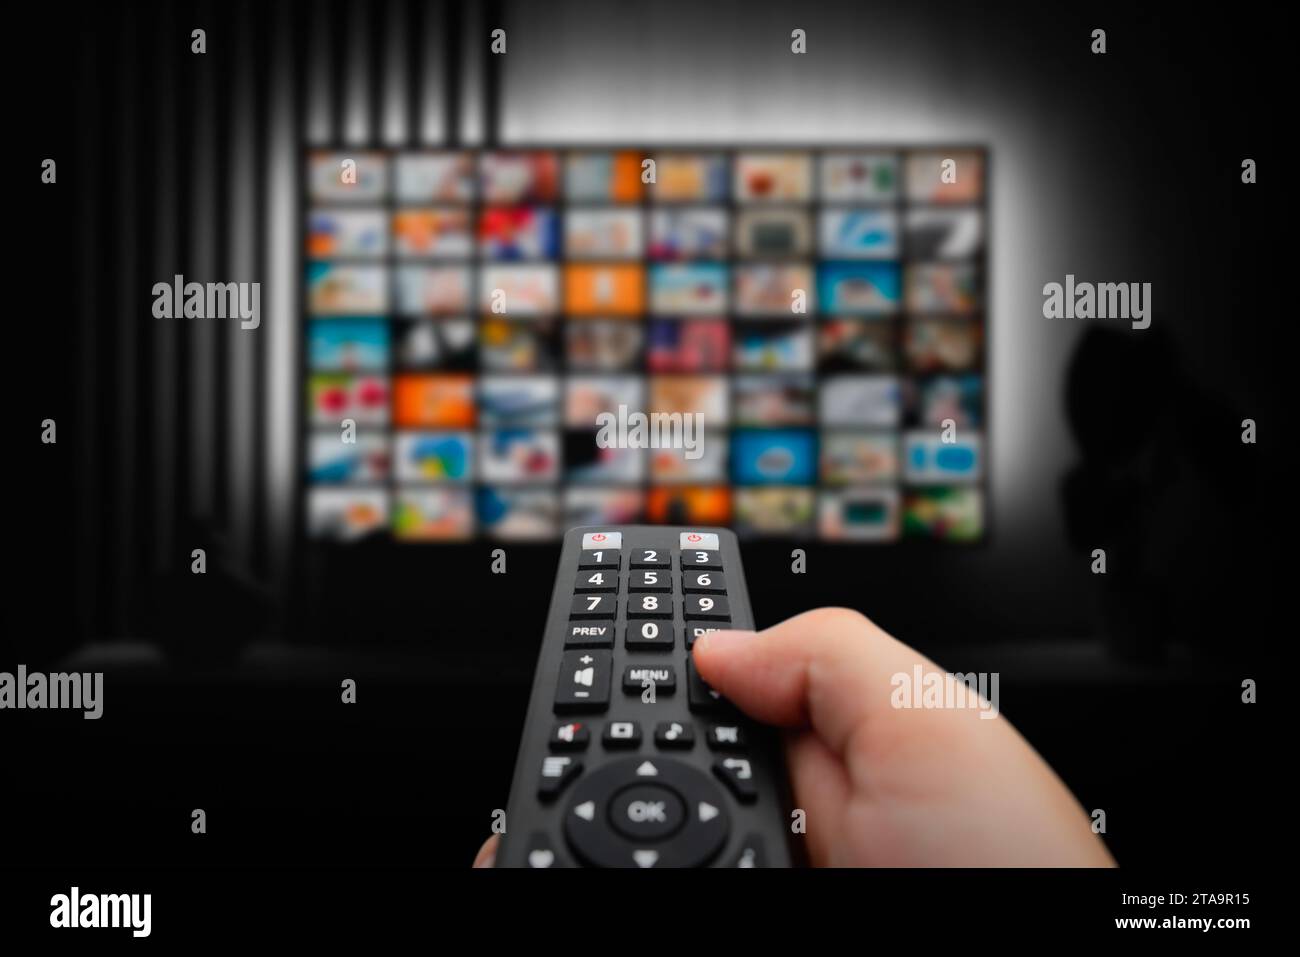 VOD service screen. Man watching TV with remote control in hand. Stock Photo